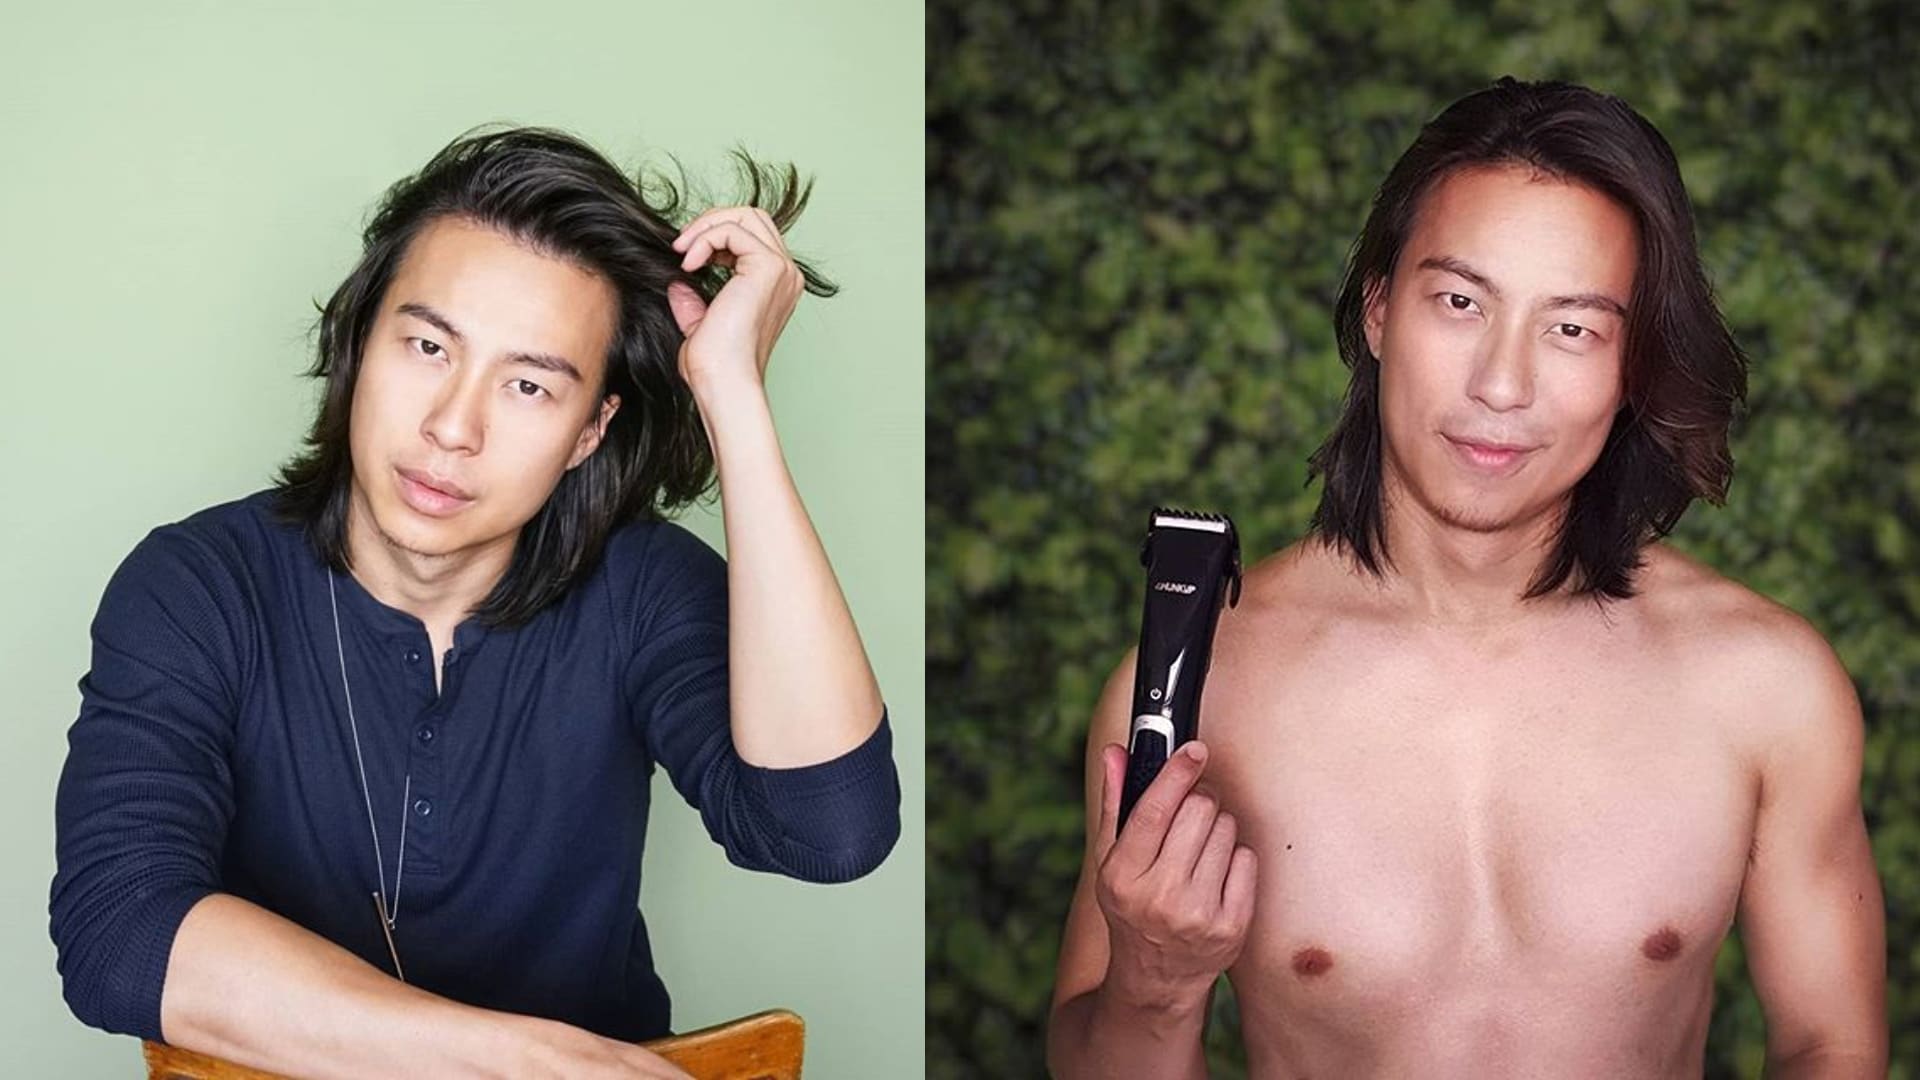 Nat Ho Endorses Shaver After Chemically Burning His Private Parts With Hair  Removal Cream - 8days